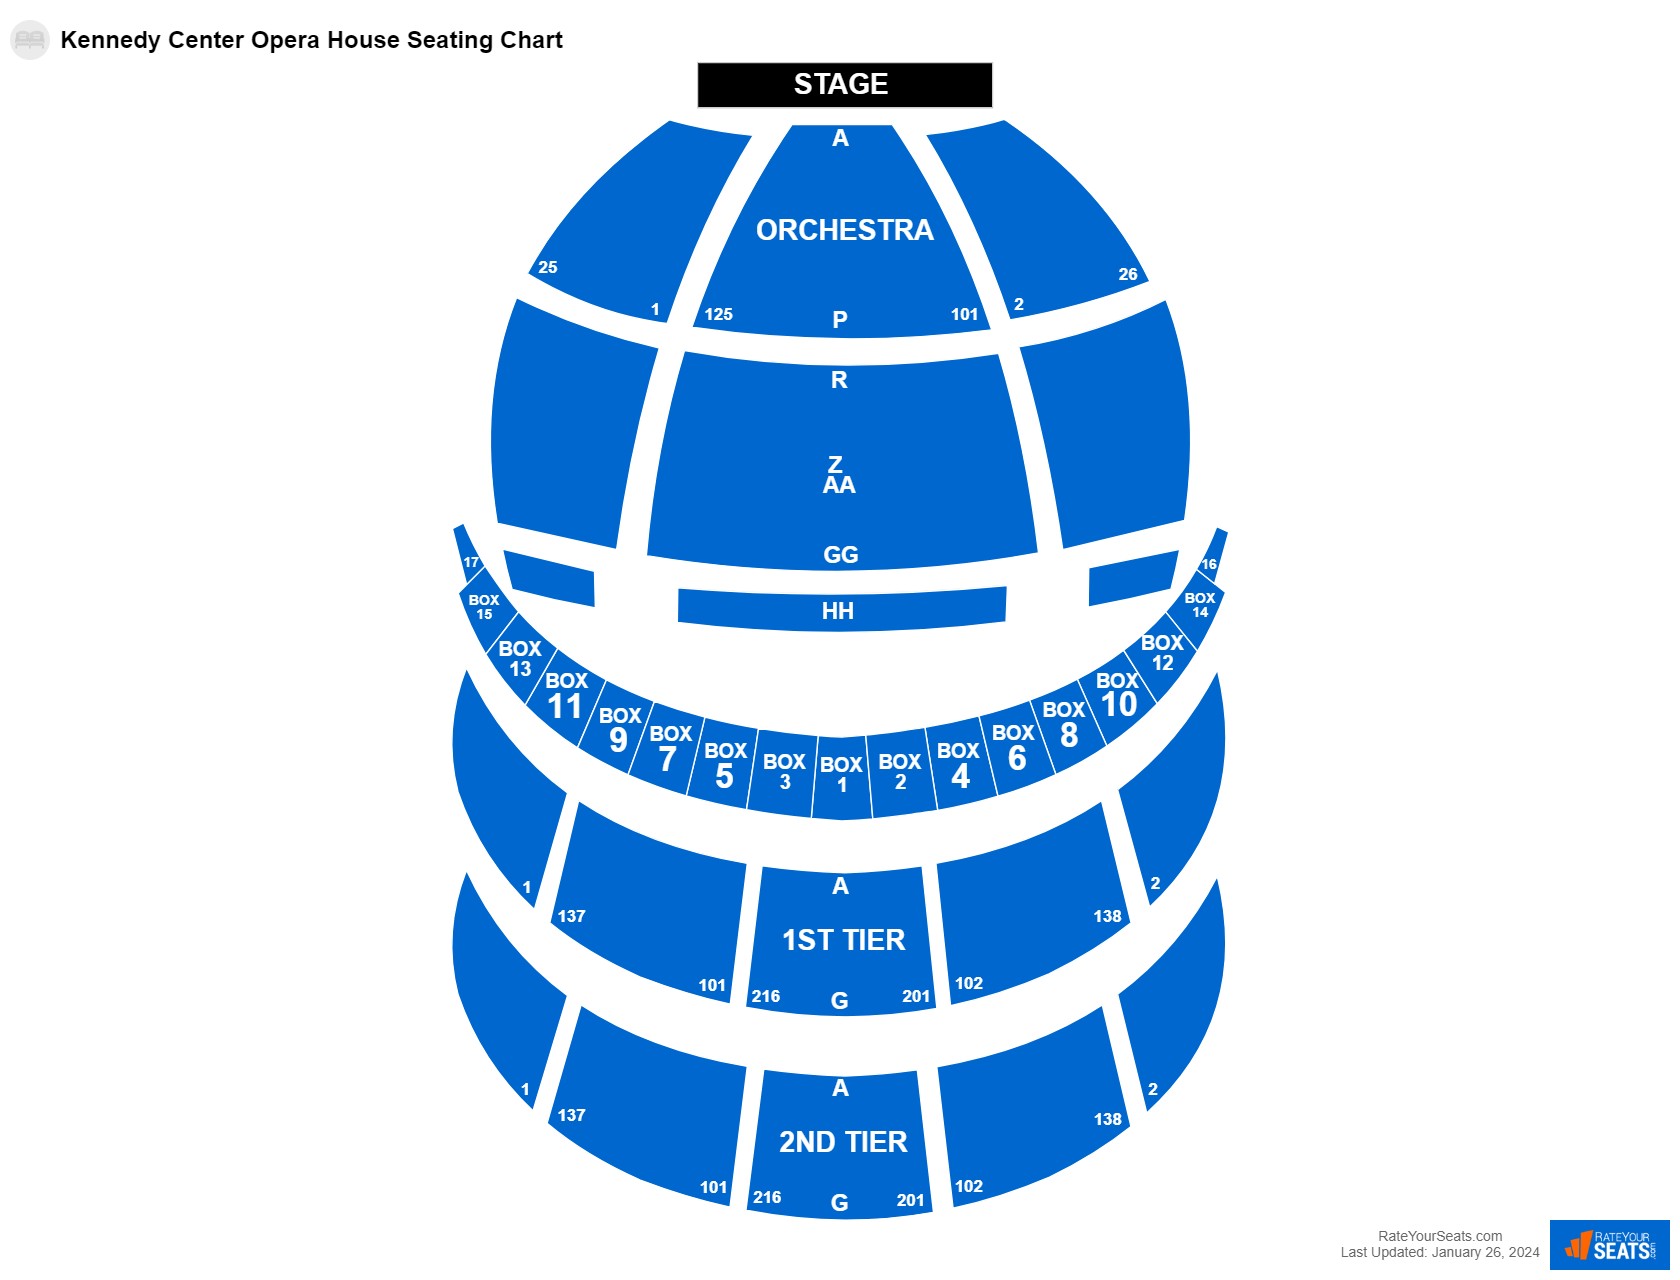 Concert seating chart at Kennedy Center Opera House